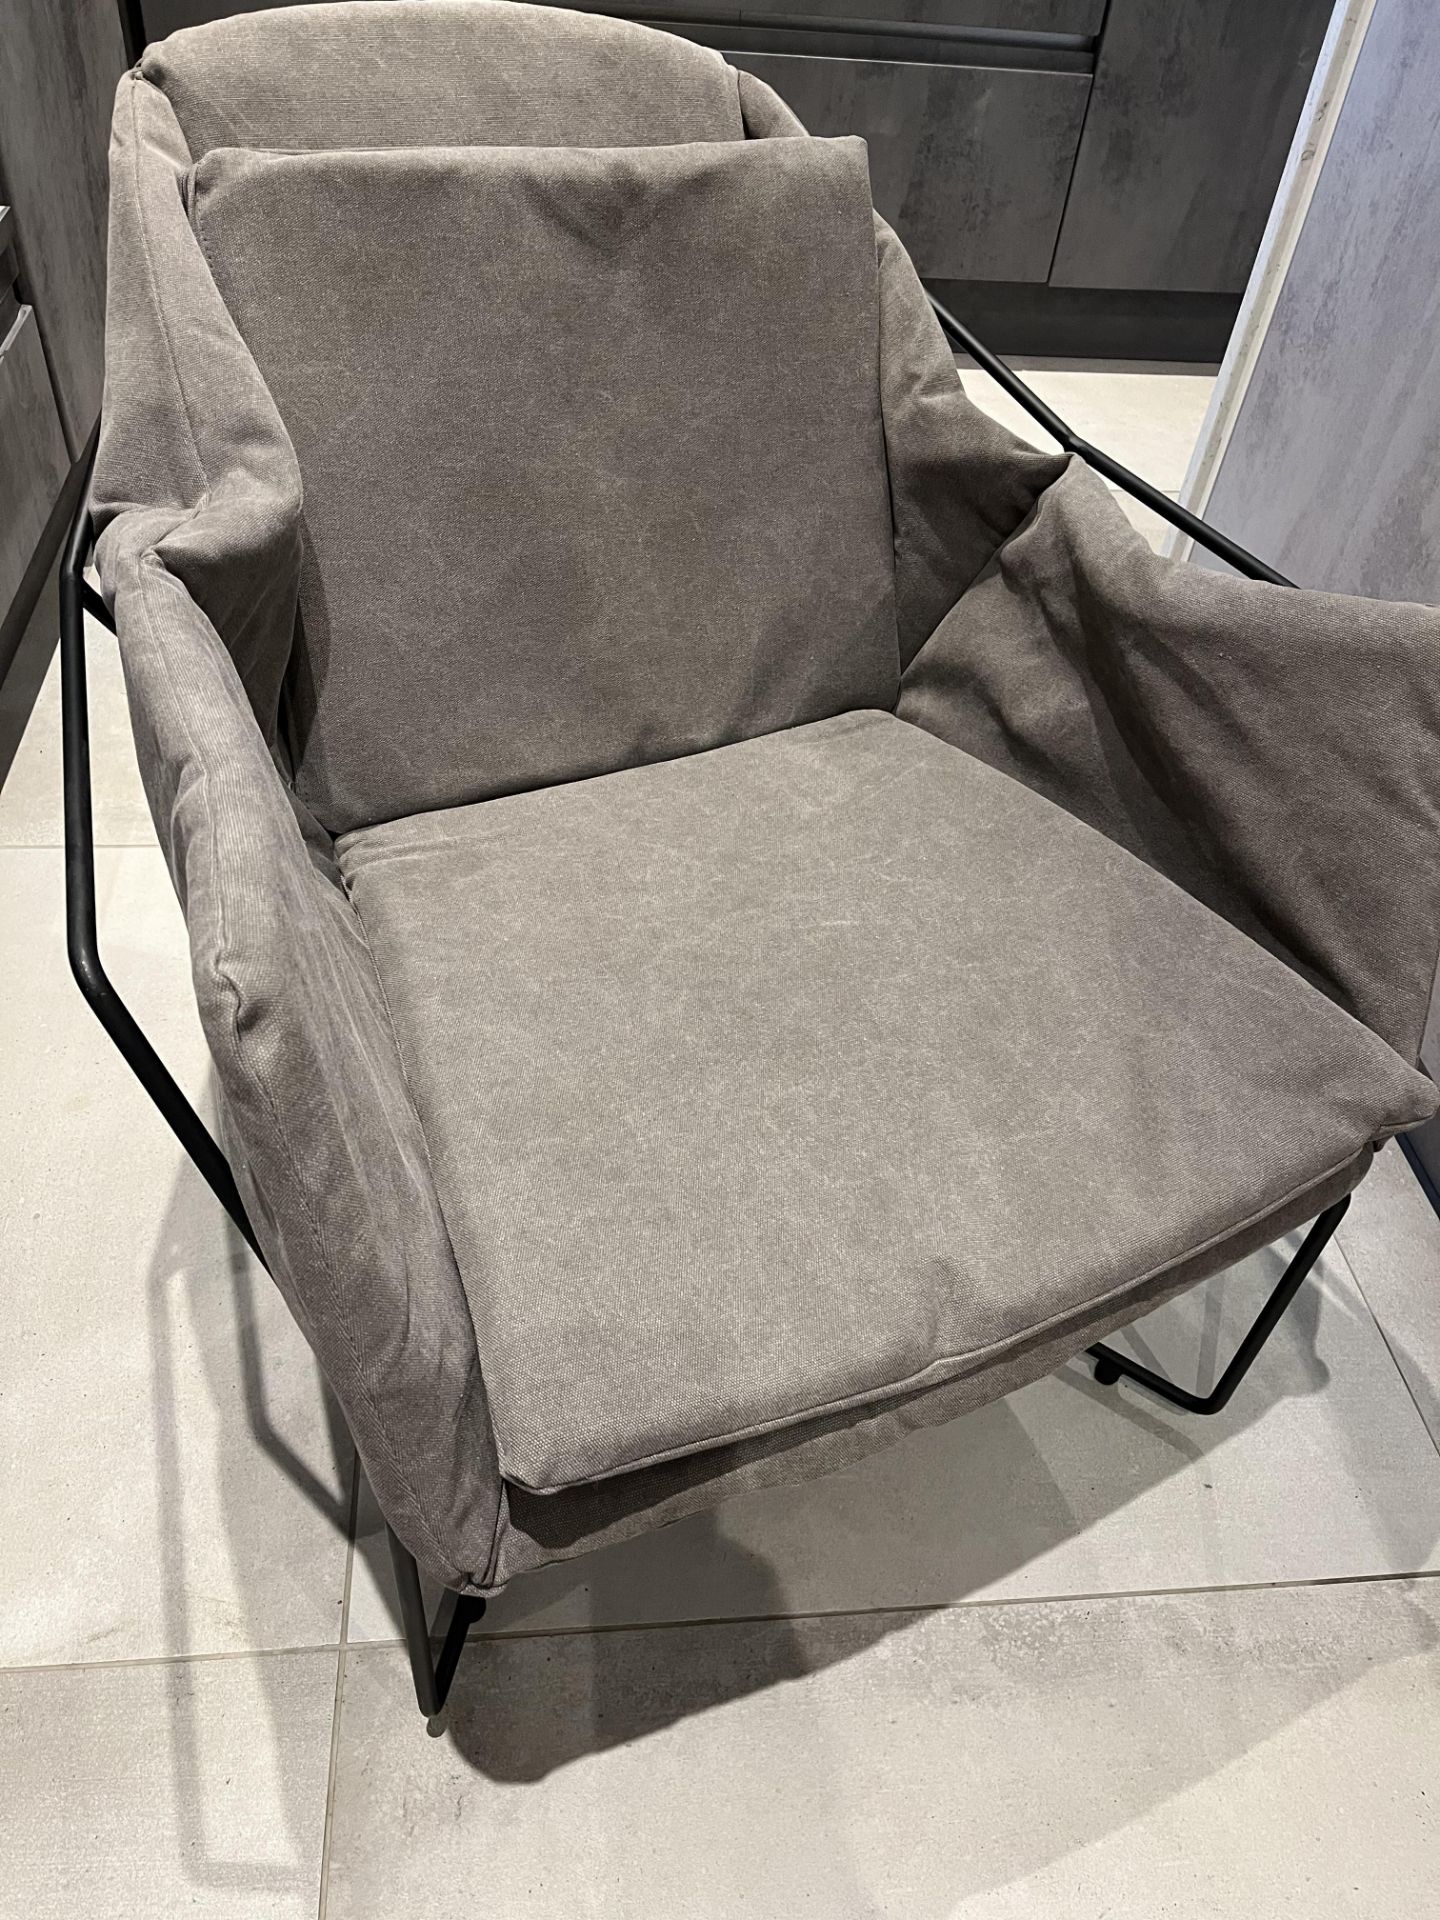 Barker Stonehouse Vasco Club Chair in Dark Gray - Excellent Ex-Display Cond - Image 4 of 4